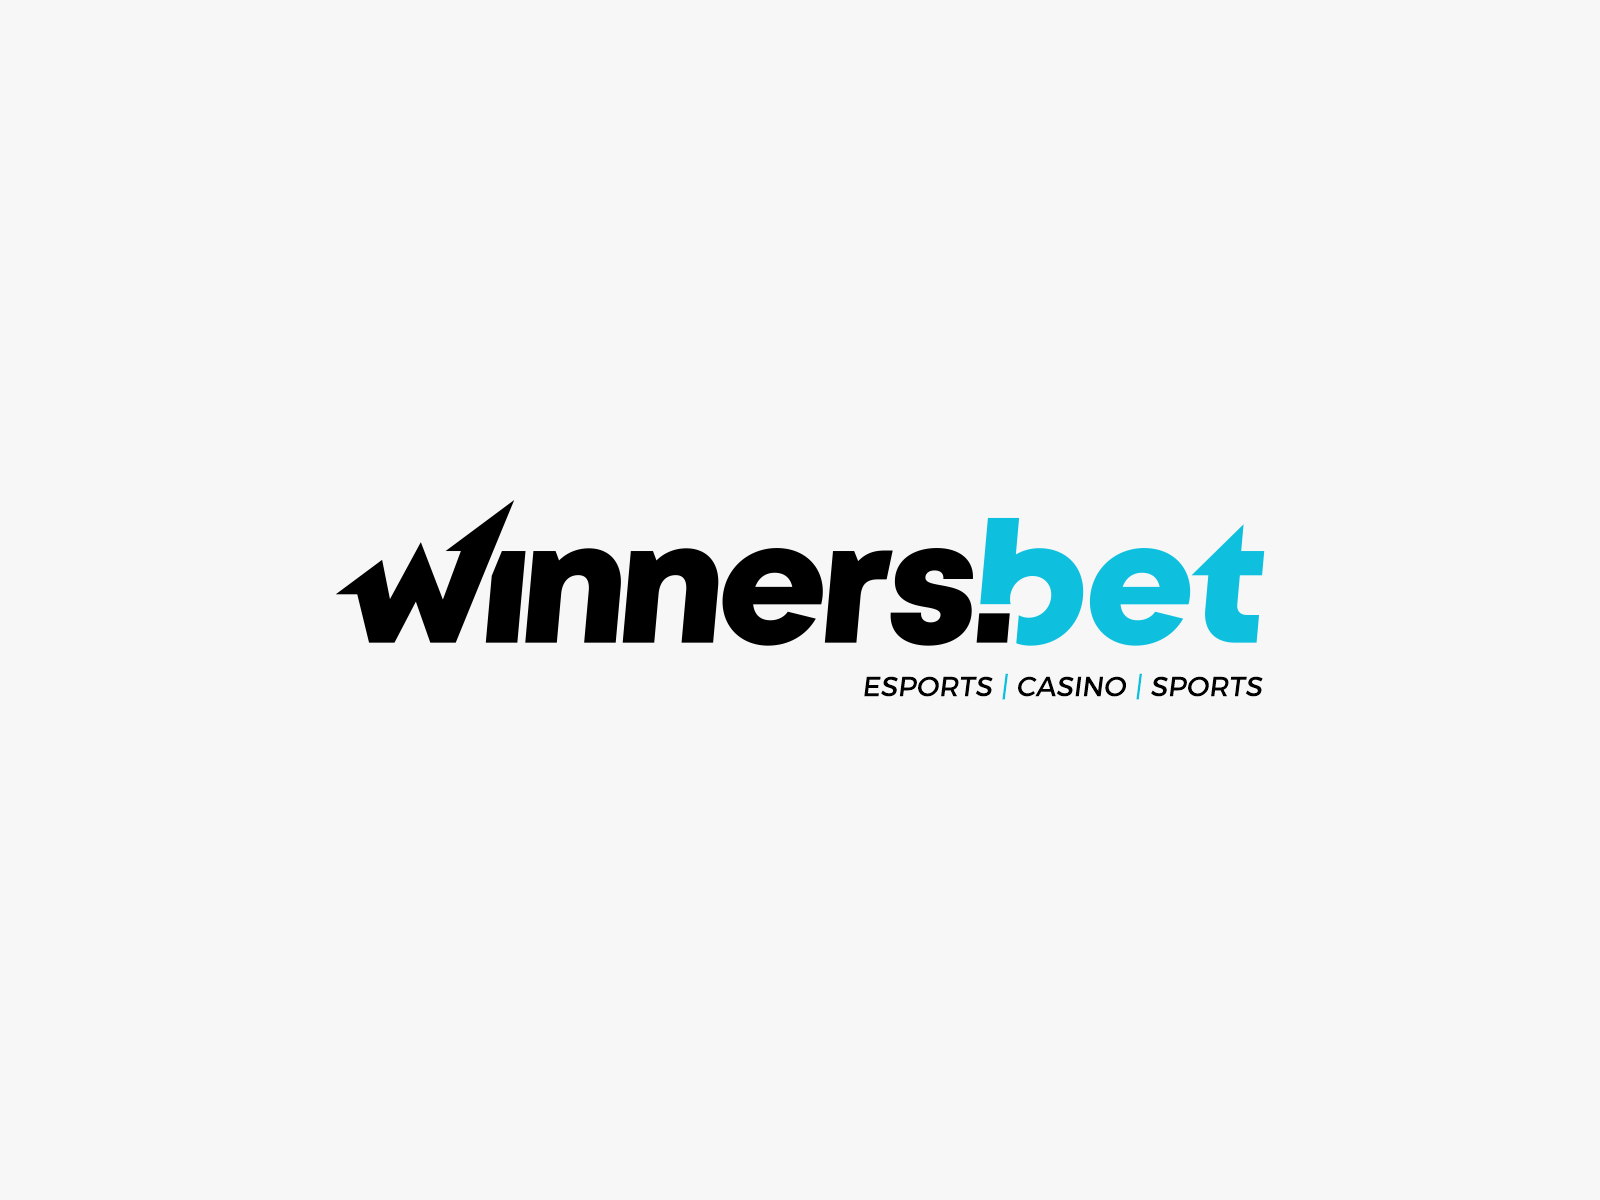 Picture Your Betwinner güvenilir mi On Top. Read This And Make It So